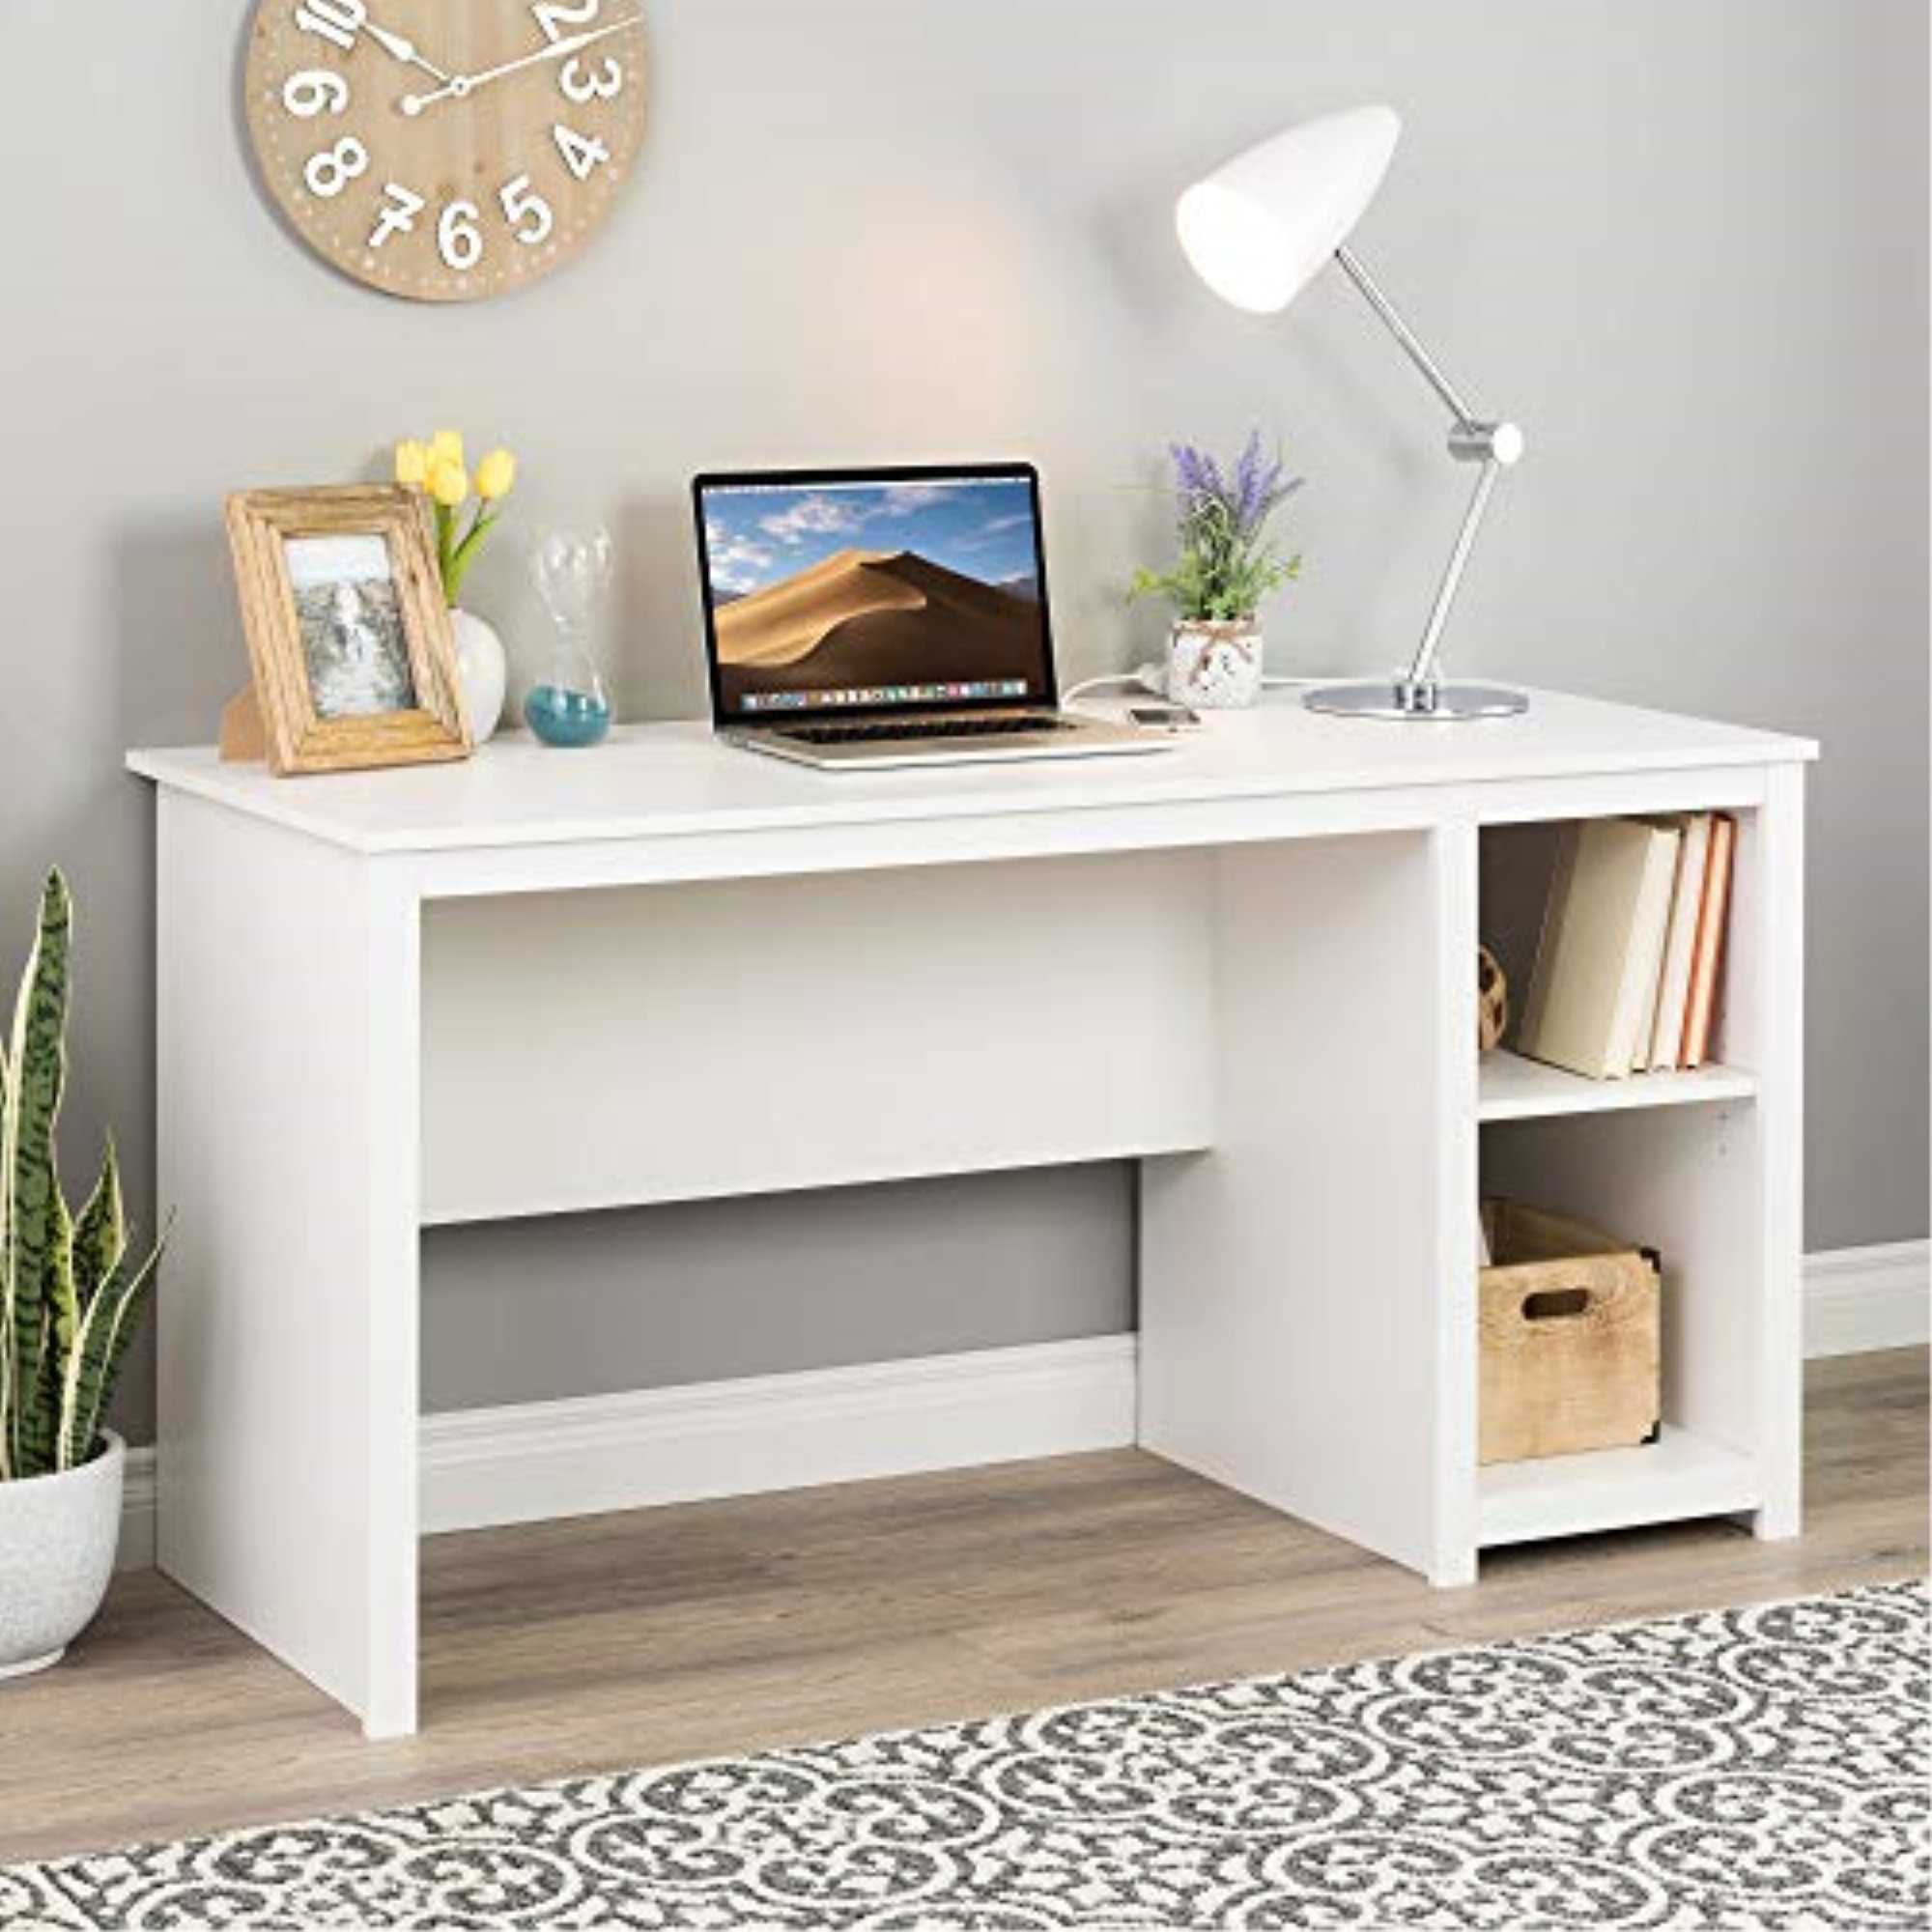  Tangkula White Desk with Storage Drawer & Shelves, Compact Desk  for Small Space, Modern Wooden Study Desk Writing Desk with Storage Drawer  & Compartments, PC Laptop Desk Small Desk for Bedroom 